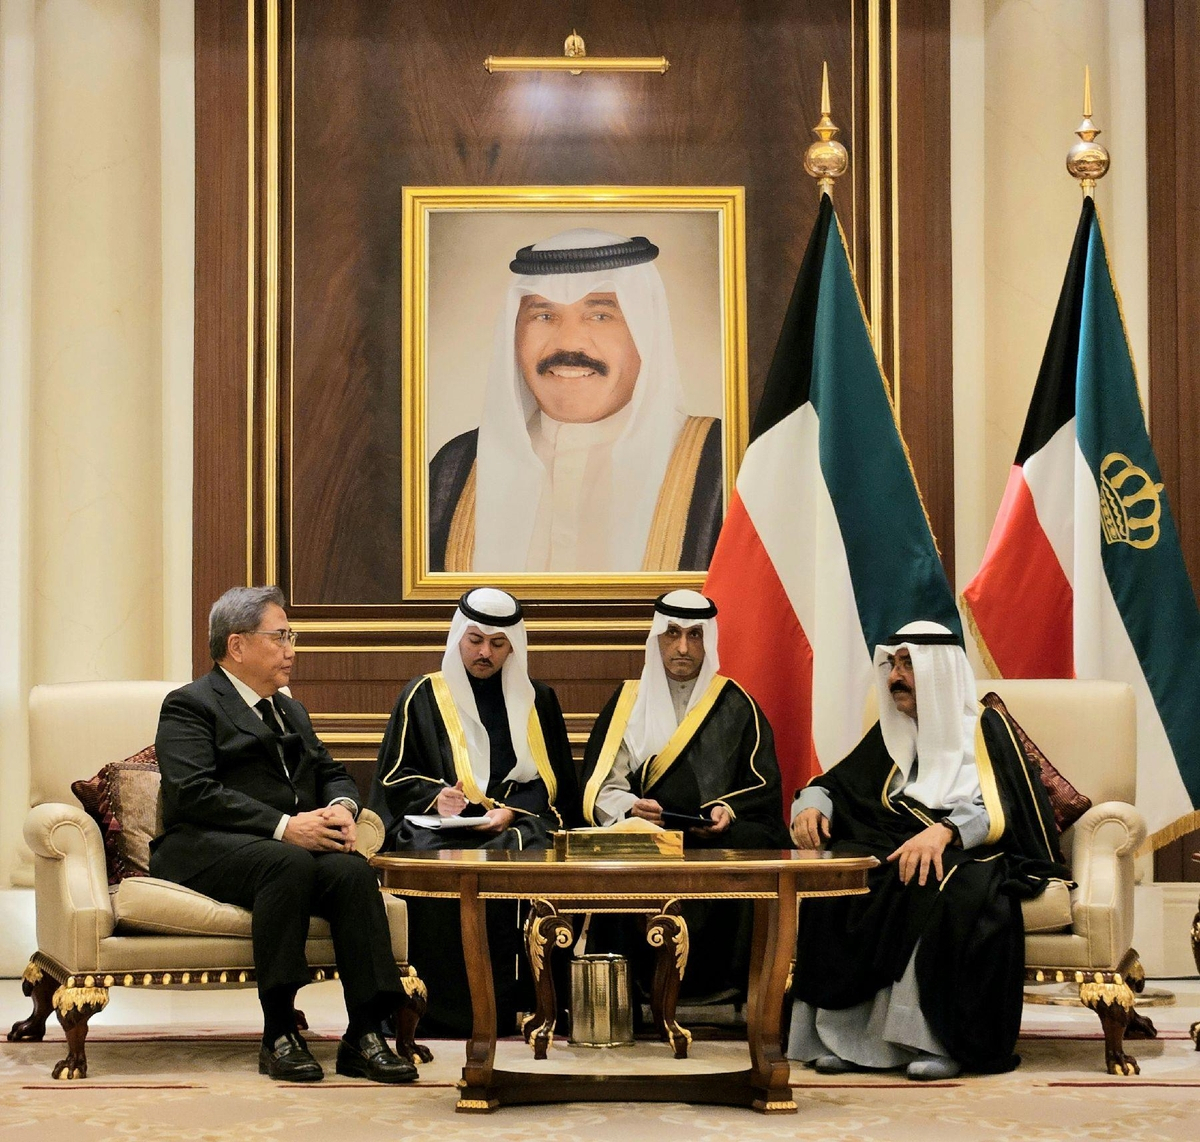 Foreign Minister Park Jin (left) speaks to Kuwait's new emir, Mishal Al Ahmed Al Jaber Al Sabah (right), during a meeting in the Middle Eastern state on Monday. (Ministry of Foreign Affairs)